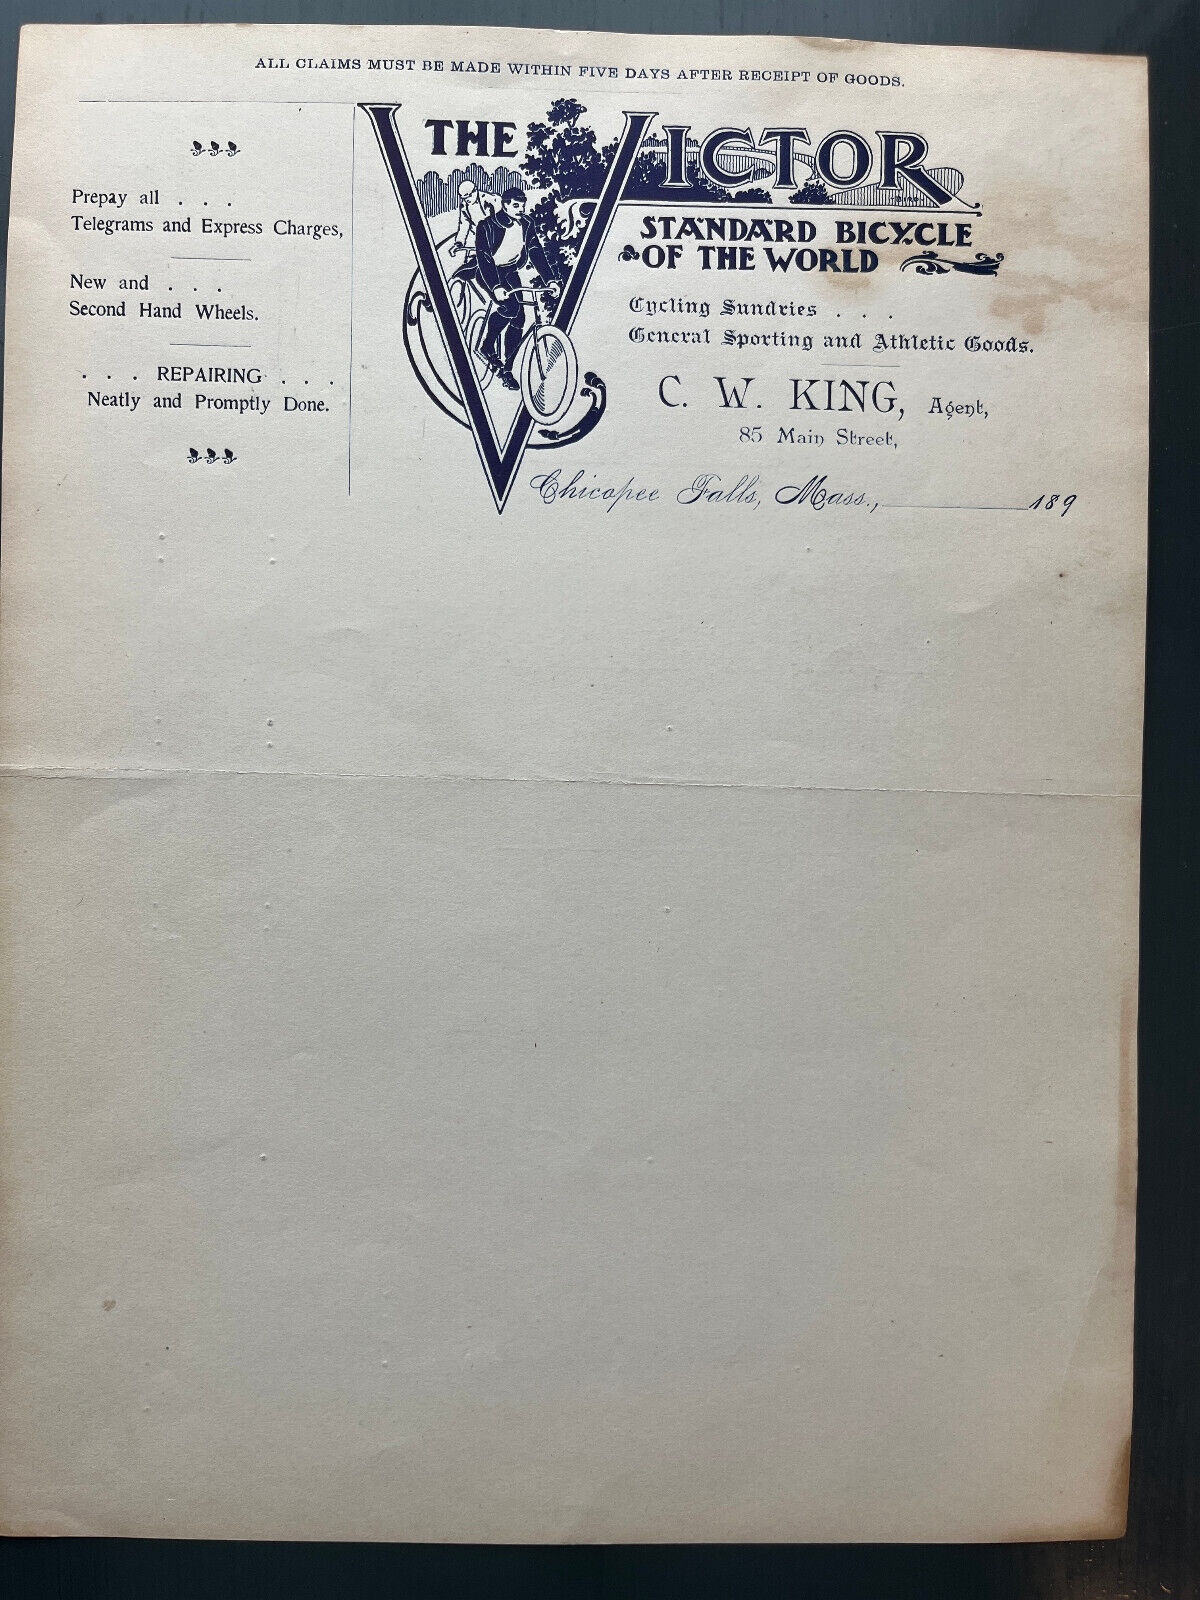 1918 THE VICTOR STANDARD BICYCLE OF THE WORLD LETTERHEAD CHICOPEE FALLS MASS.